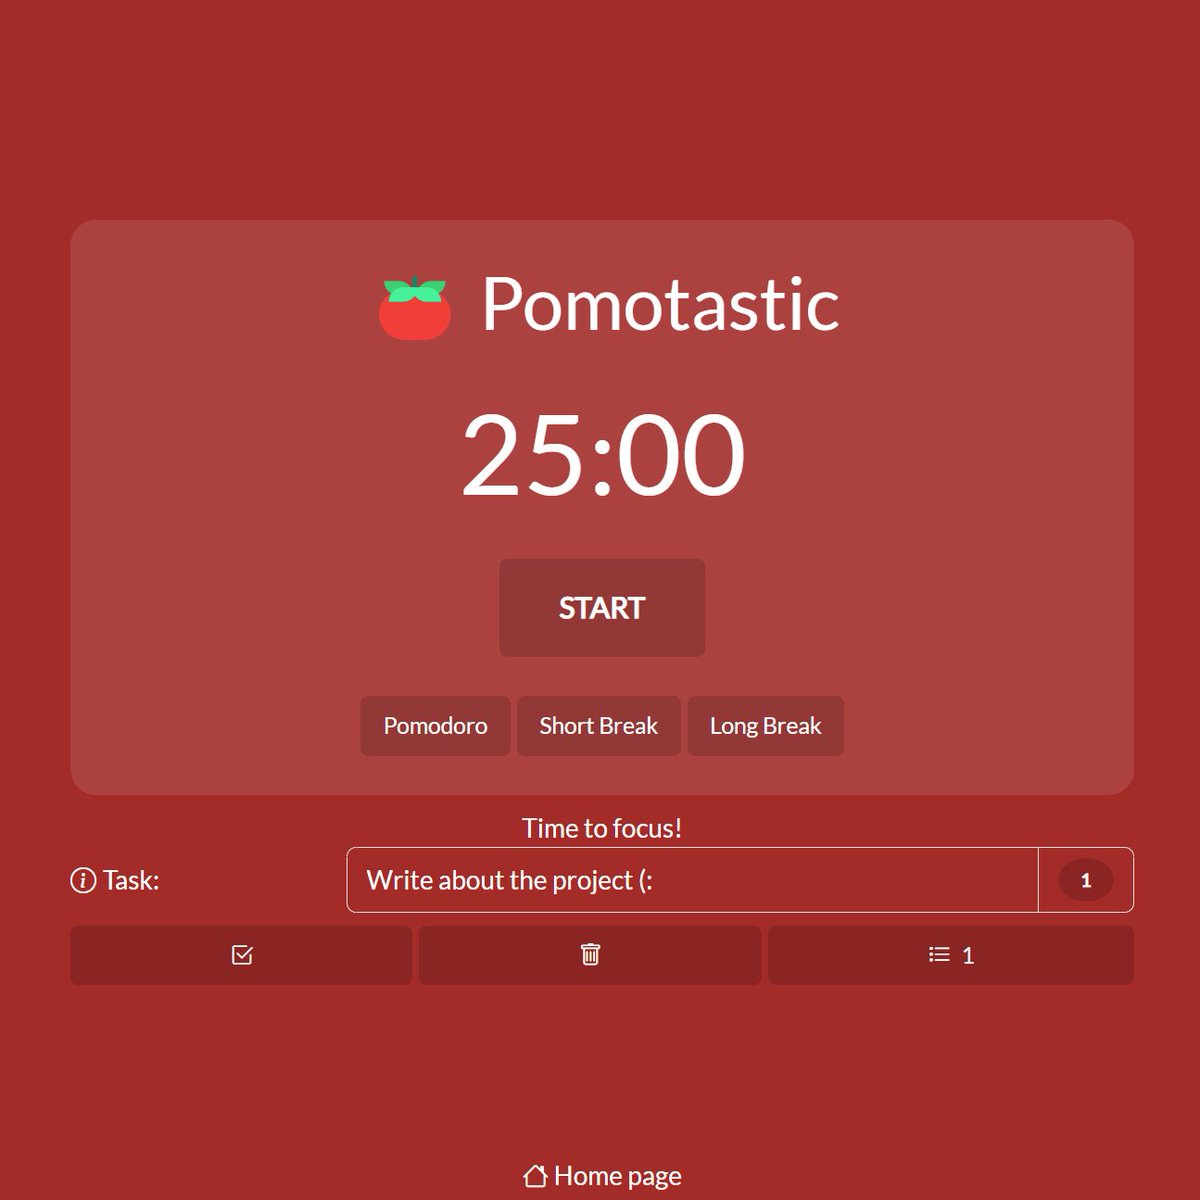 👋 I wanted to share my story of creating the 🍅 #Pomotastic project that helped me be more #productive and #focused while reducing potential health problems 😉

👉 bohdan-v.medium.com/the-story-of-c…

#pomodoro #productivity #timemanagement #pomodorotechnique #taskmanagement